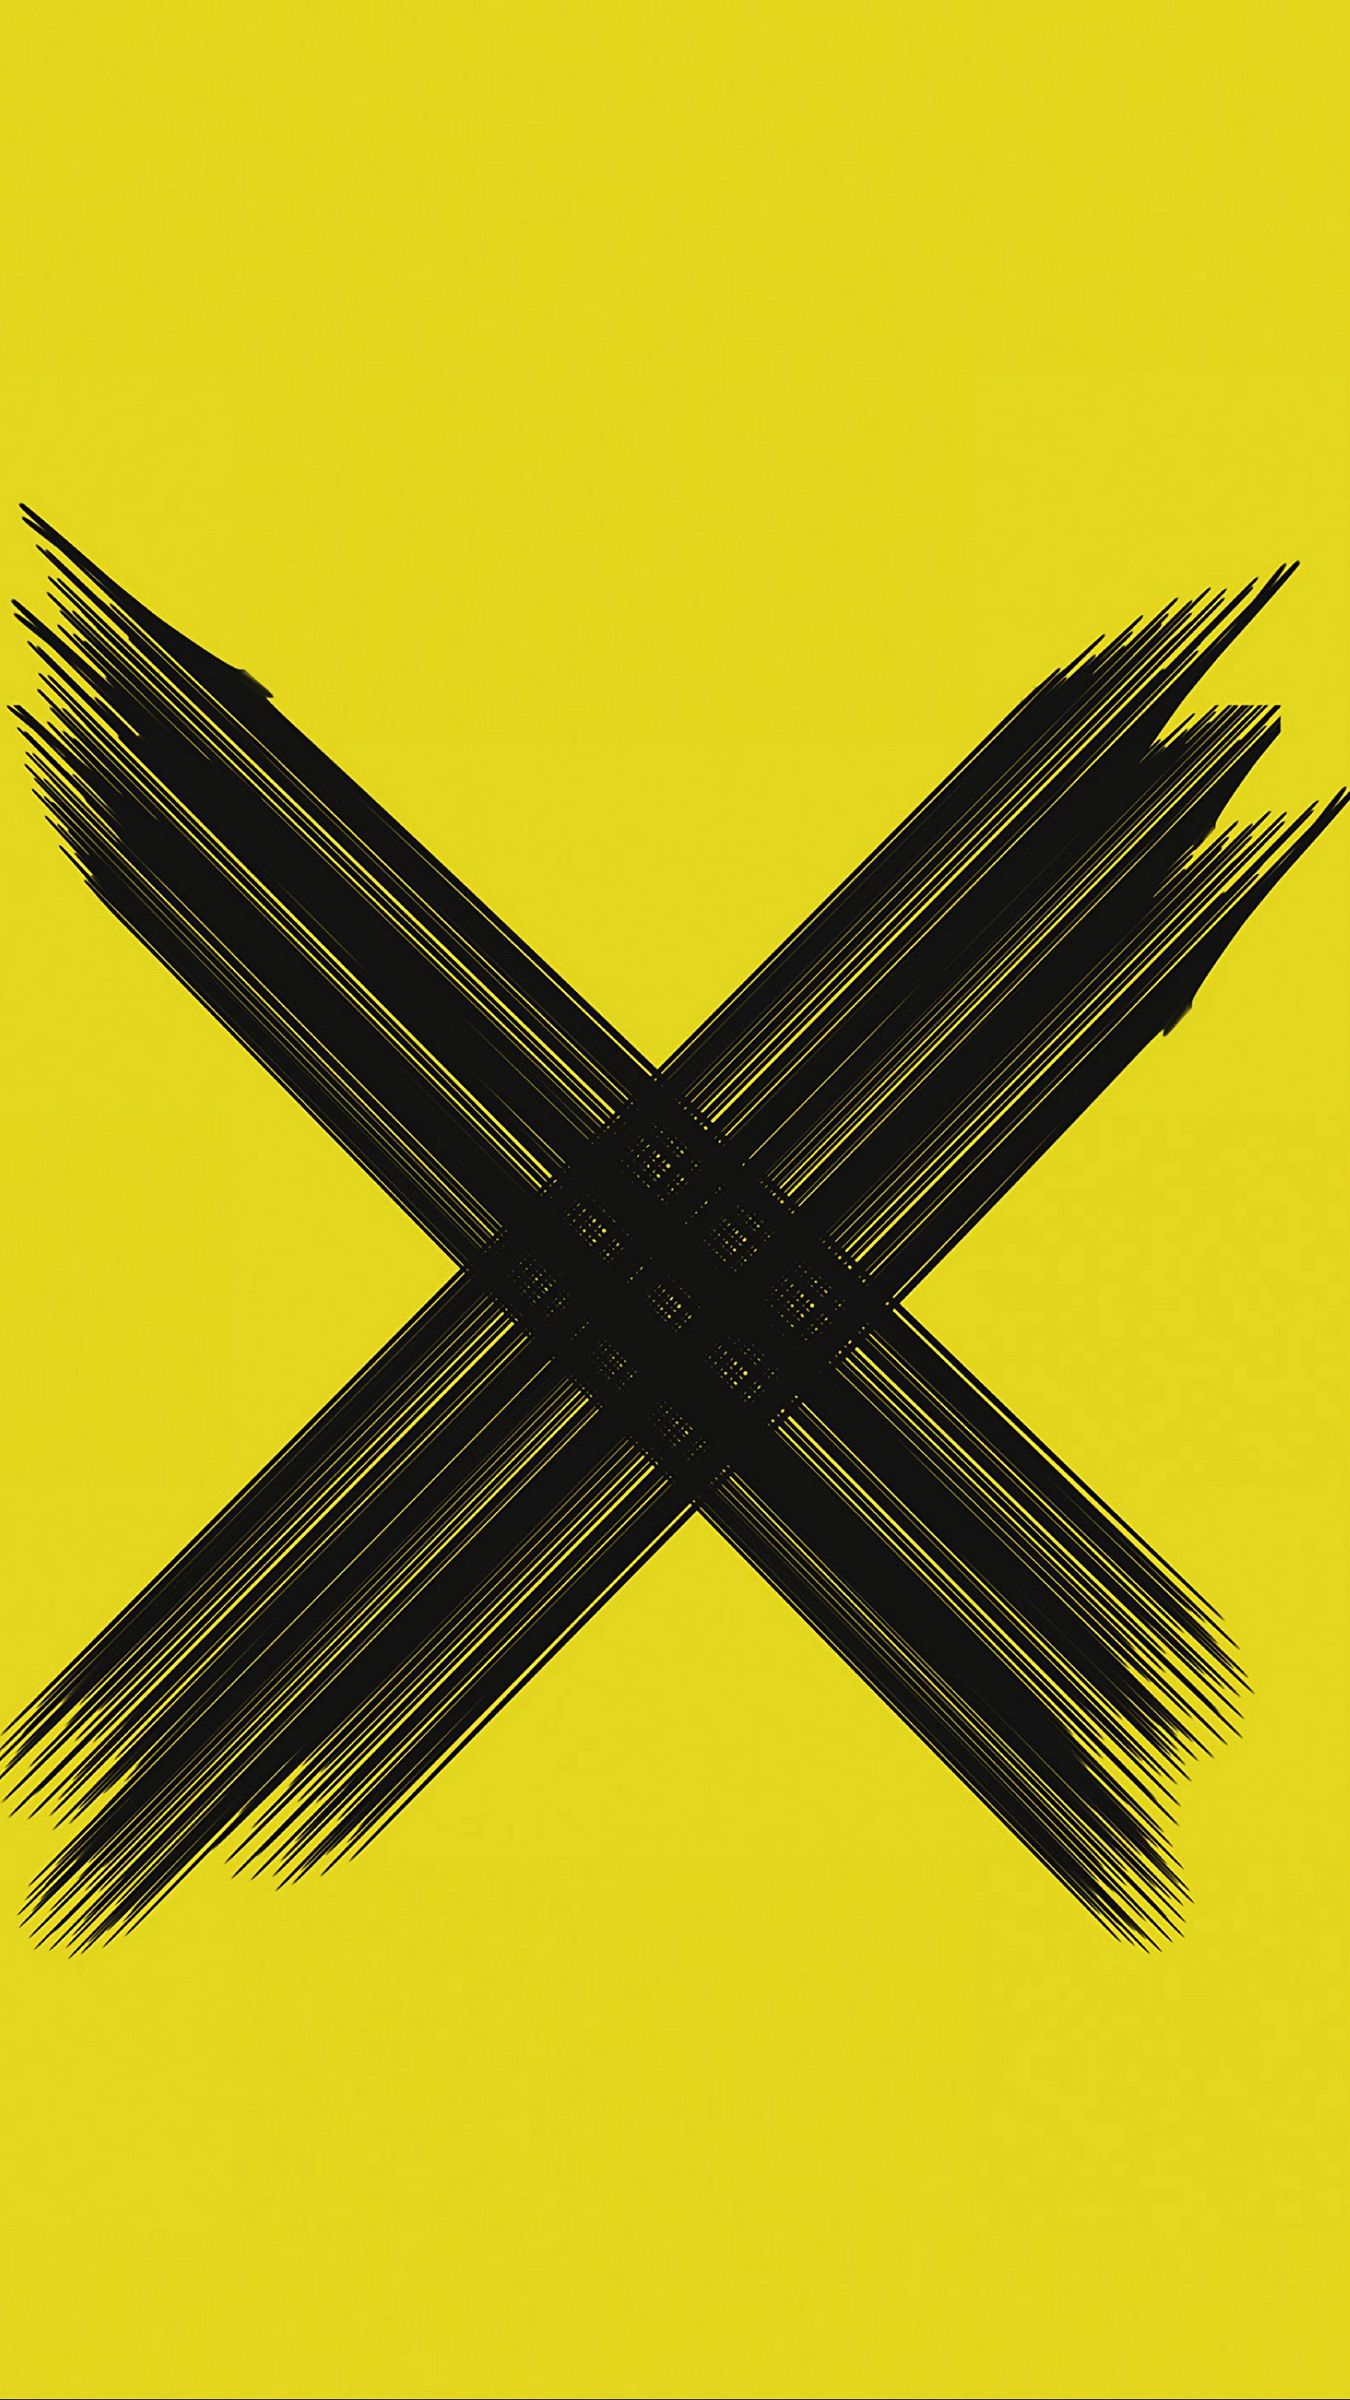 Download wallpaper 1350x2400 cross, symbol, brushstrokes, intersection, black, yellow, minimalism iphone 8+/7+/6s+/for parallax HD background